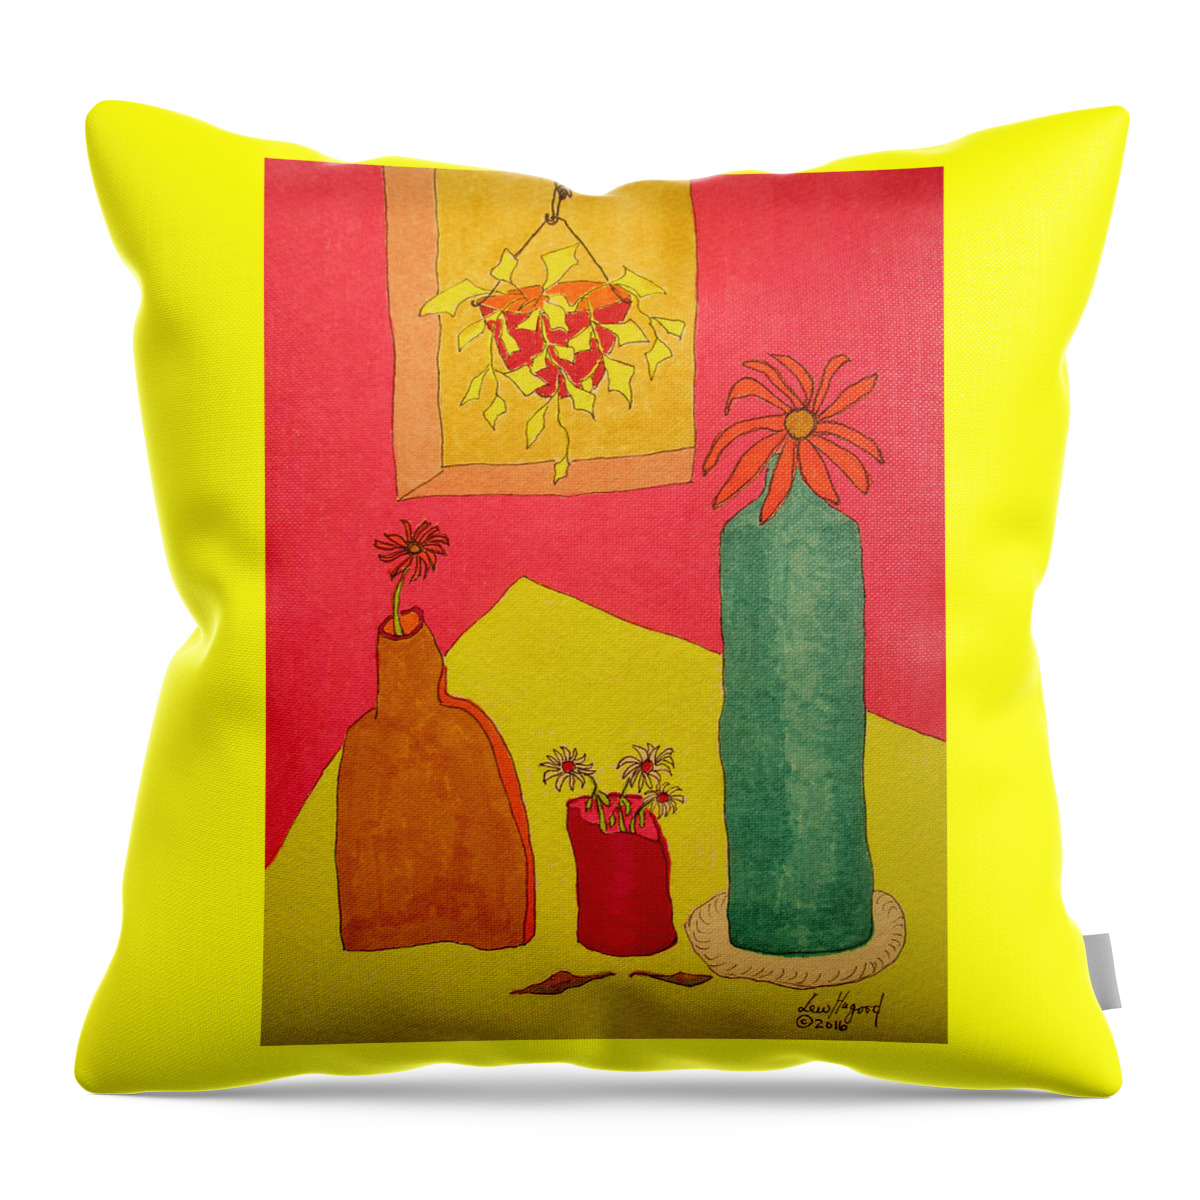 Hagood Throw Pillow featuring the painting Hanging Plant And 3 On Table by Lew Hagood